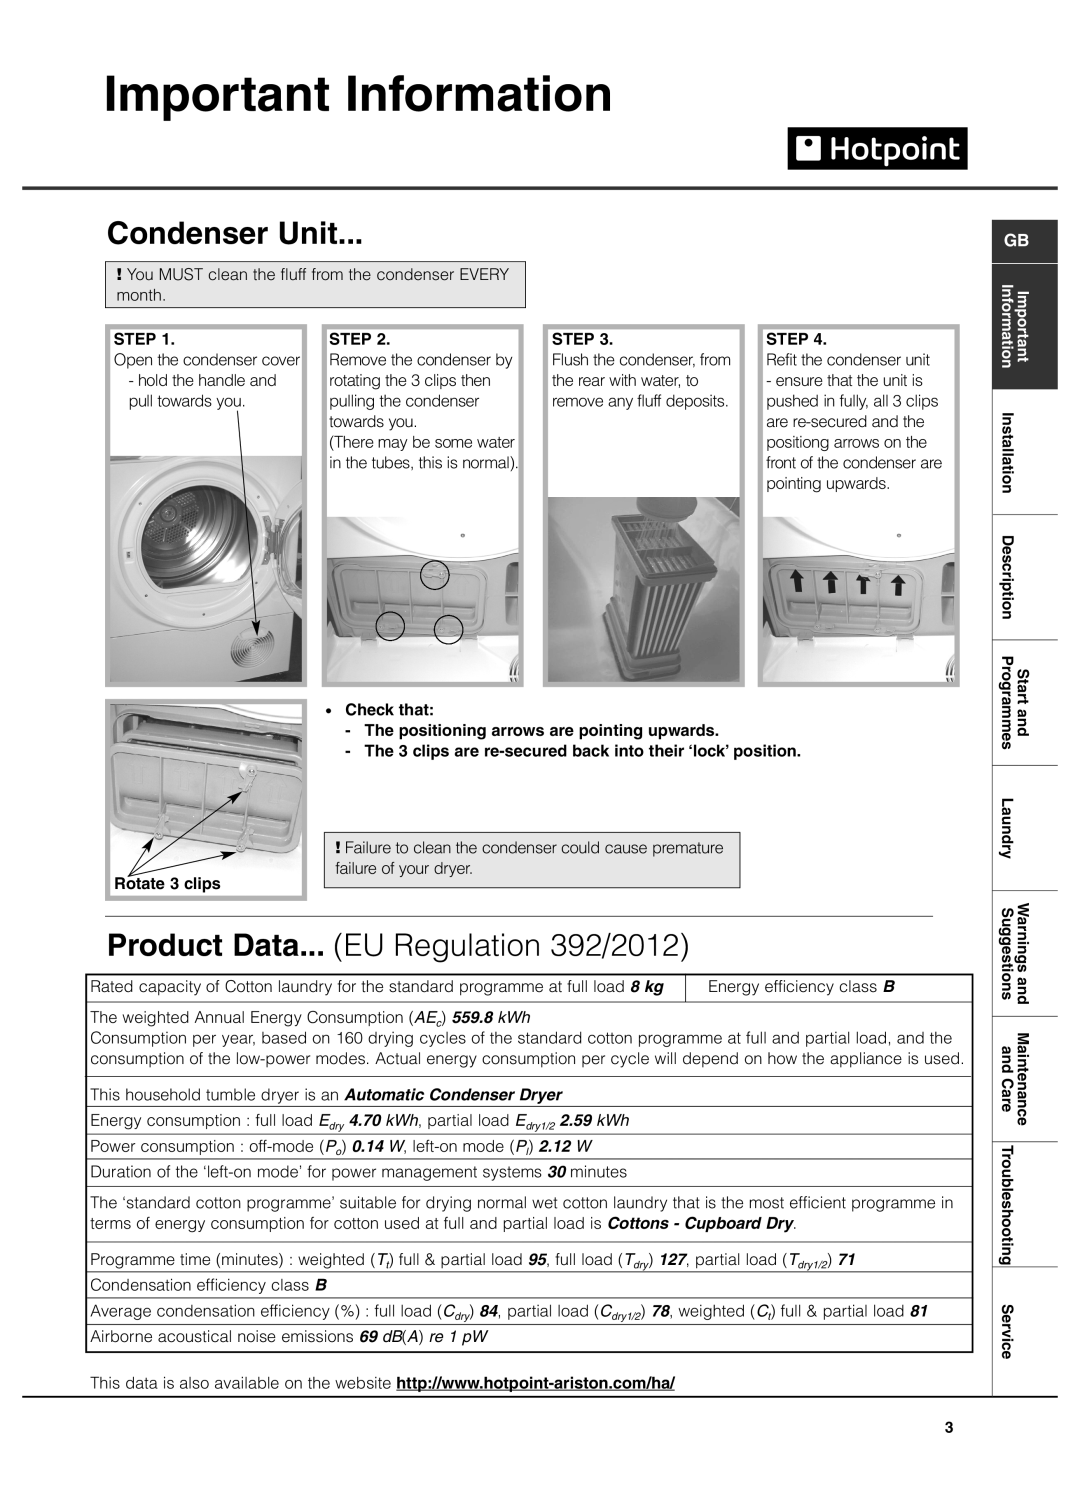 Hotpoint TCEl 87B Experience manual Condenser Unit, Important Information, Product Data... EU Regulation 392/2012 